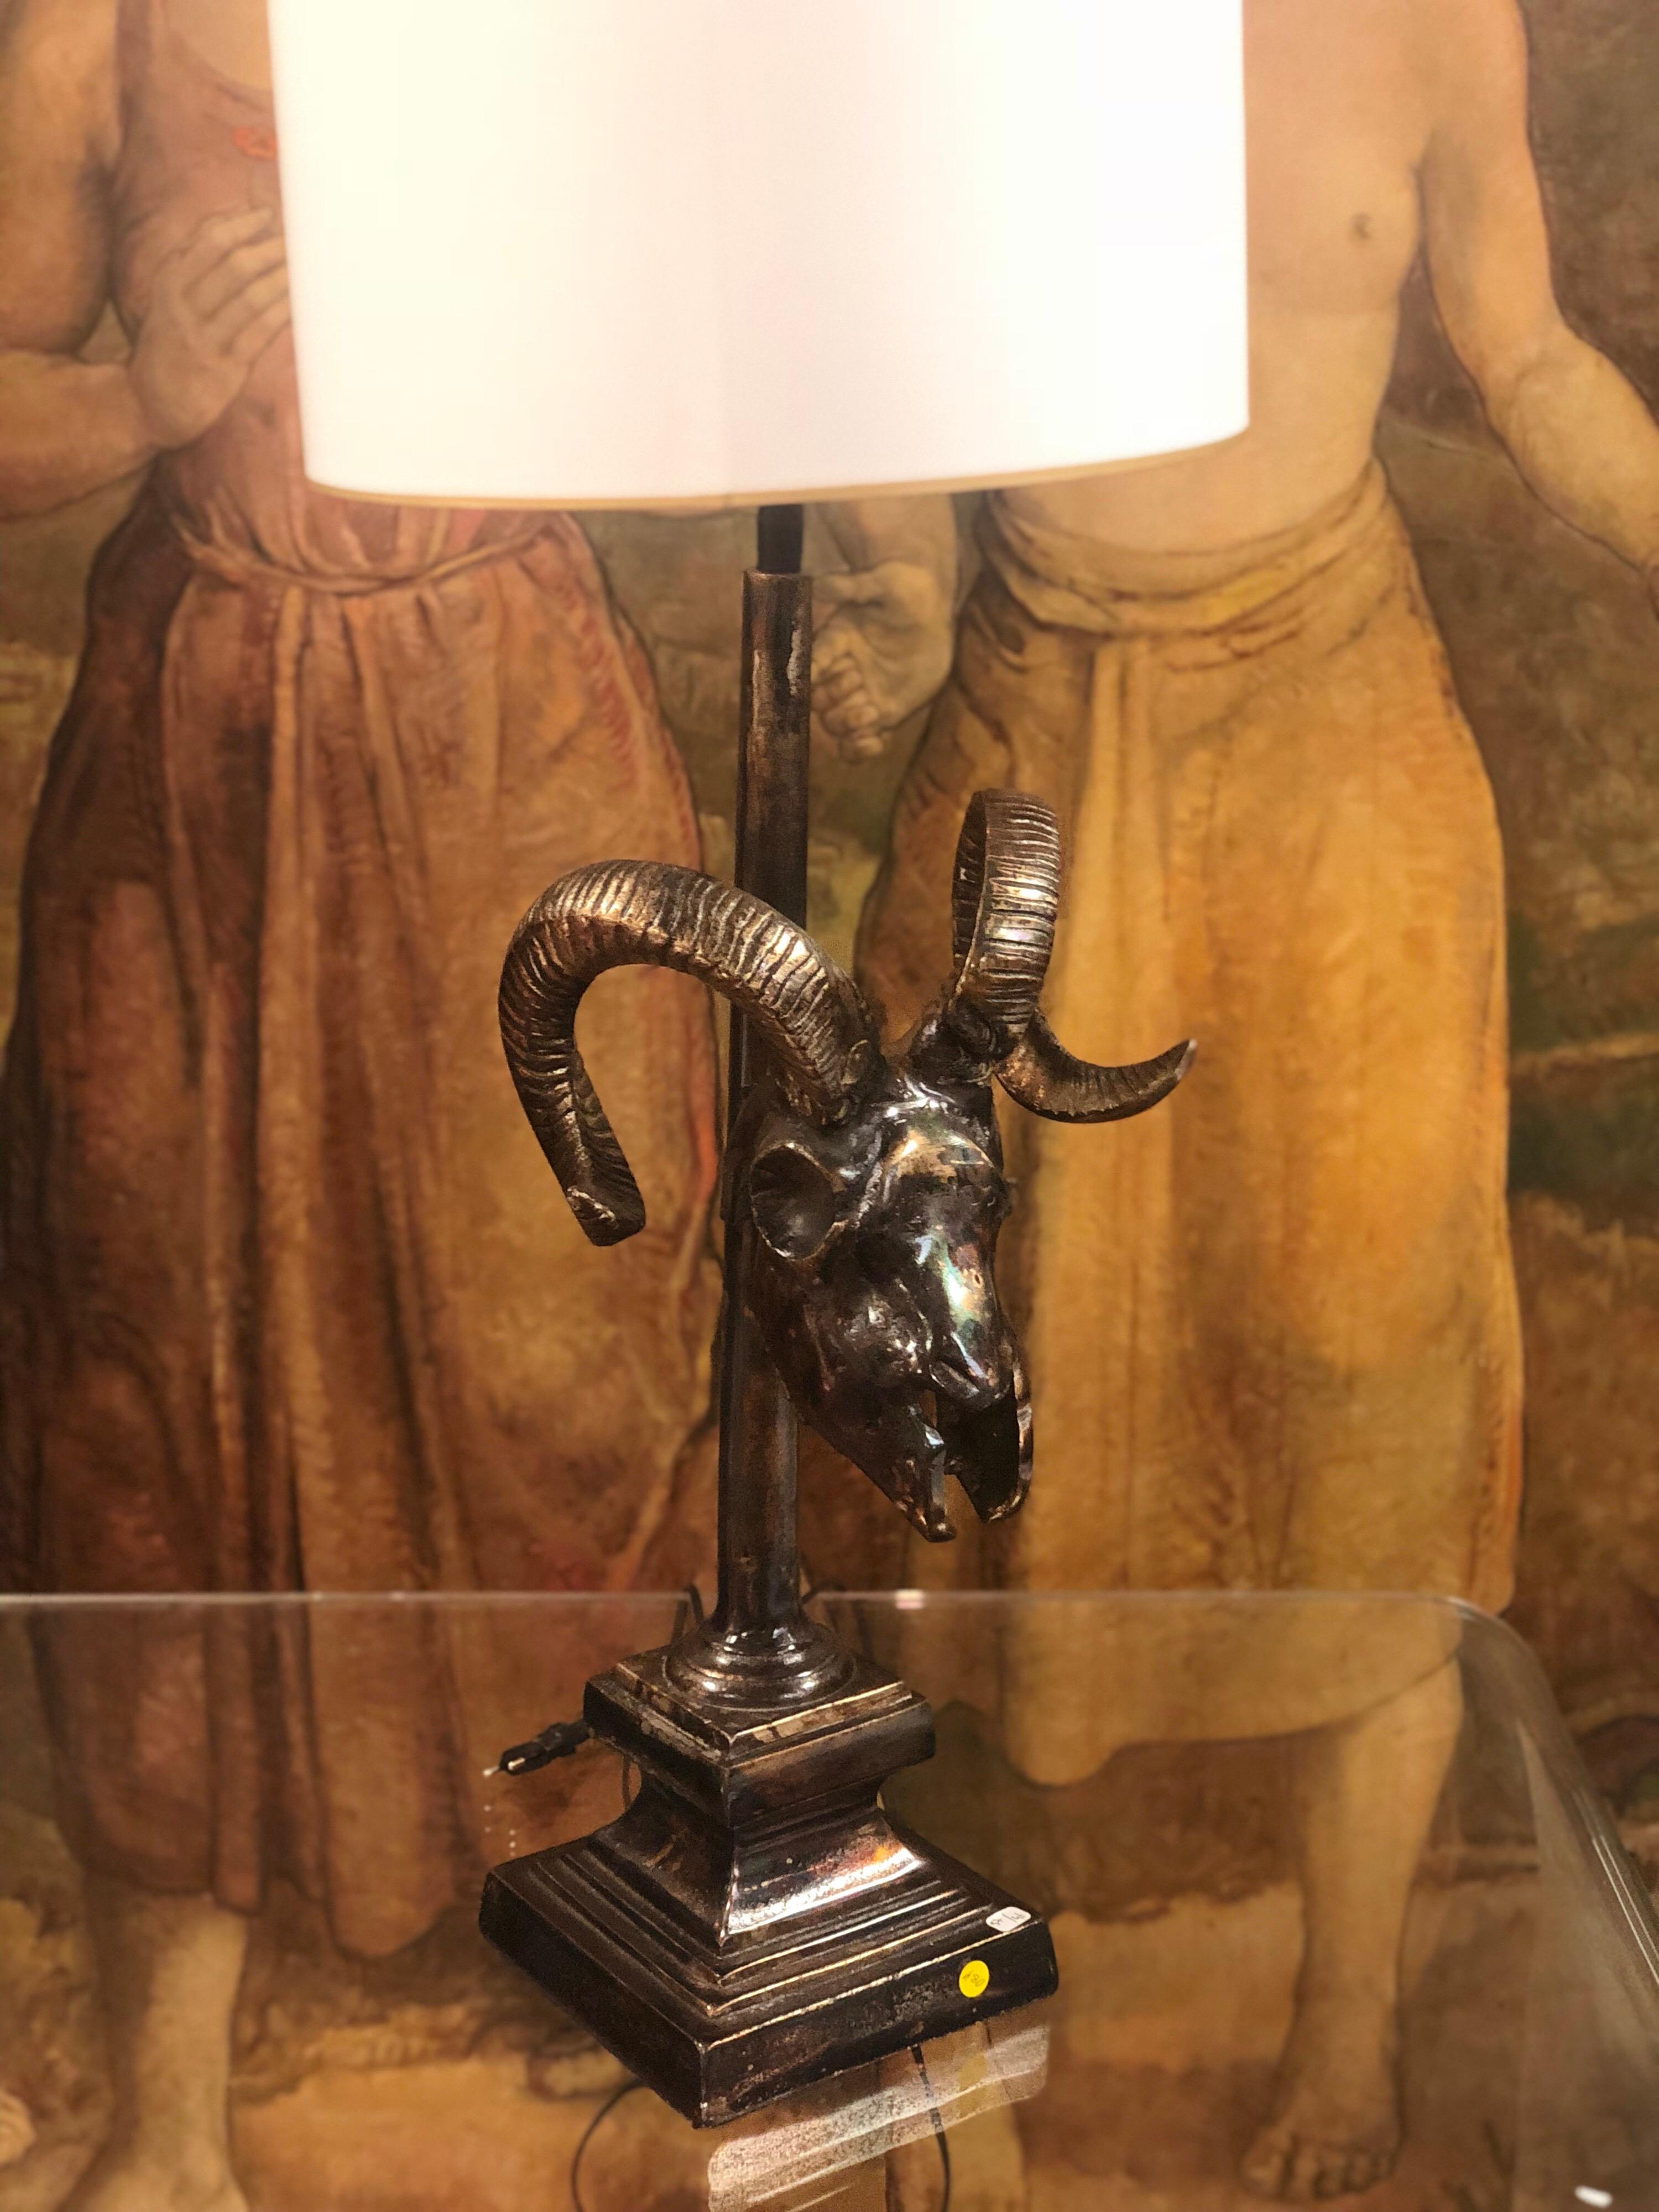 A Pair of Two Aries Skull Ram Lamps Mid-Century Modern, France 
For sale as a pair (discount available) or as an individual item.